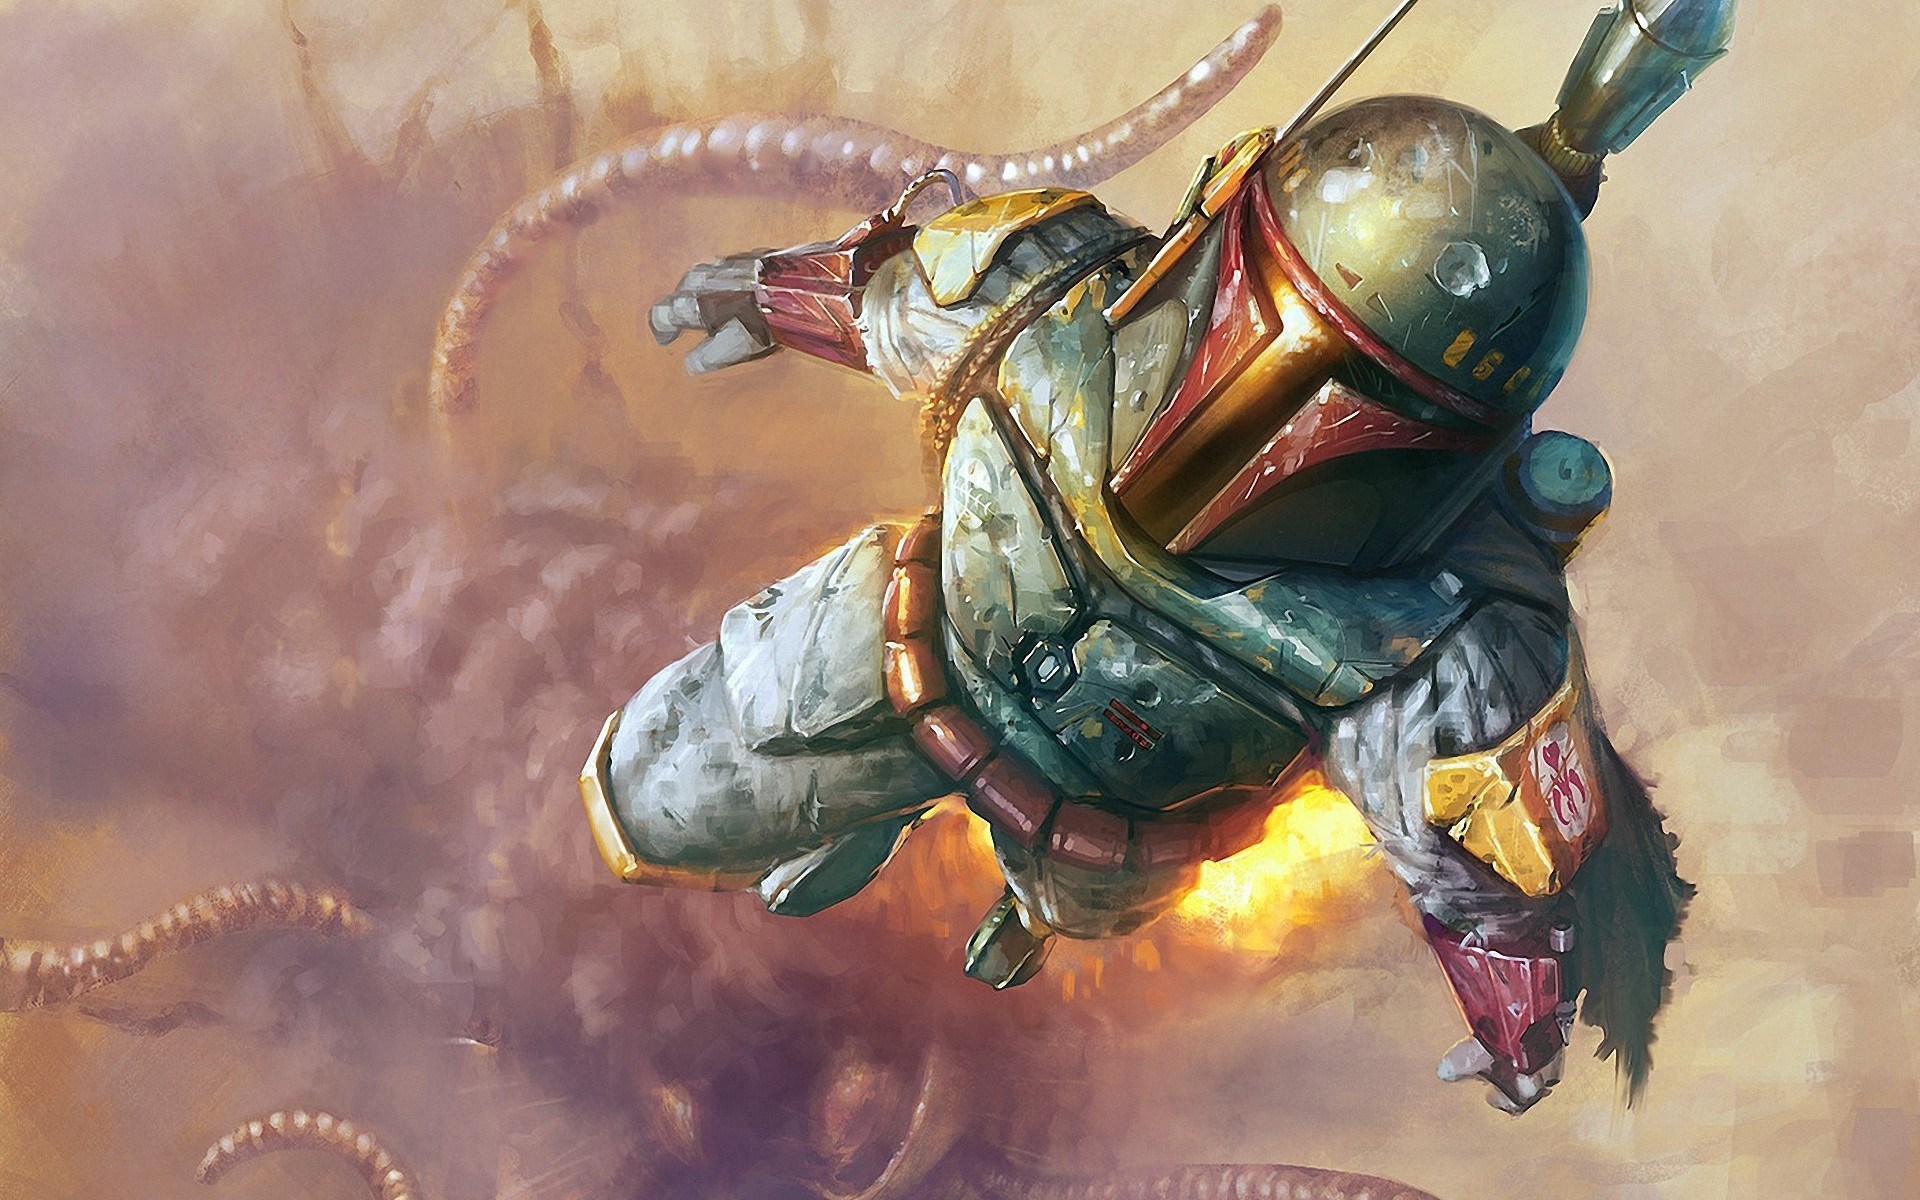 Boba Fett is a 'High-Priority' for Future Star Wars Movies